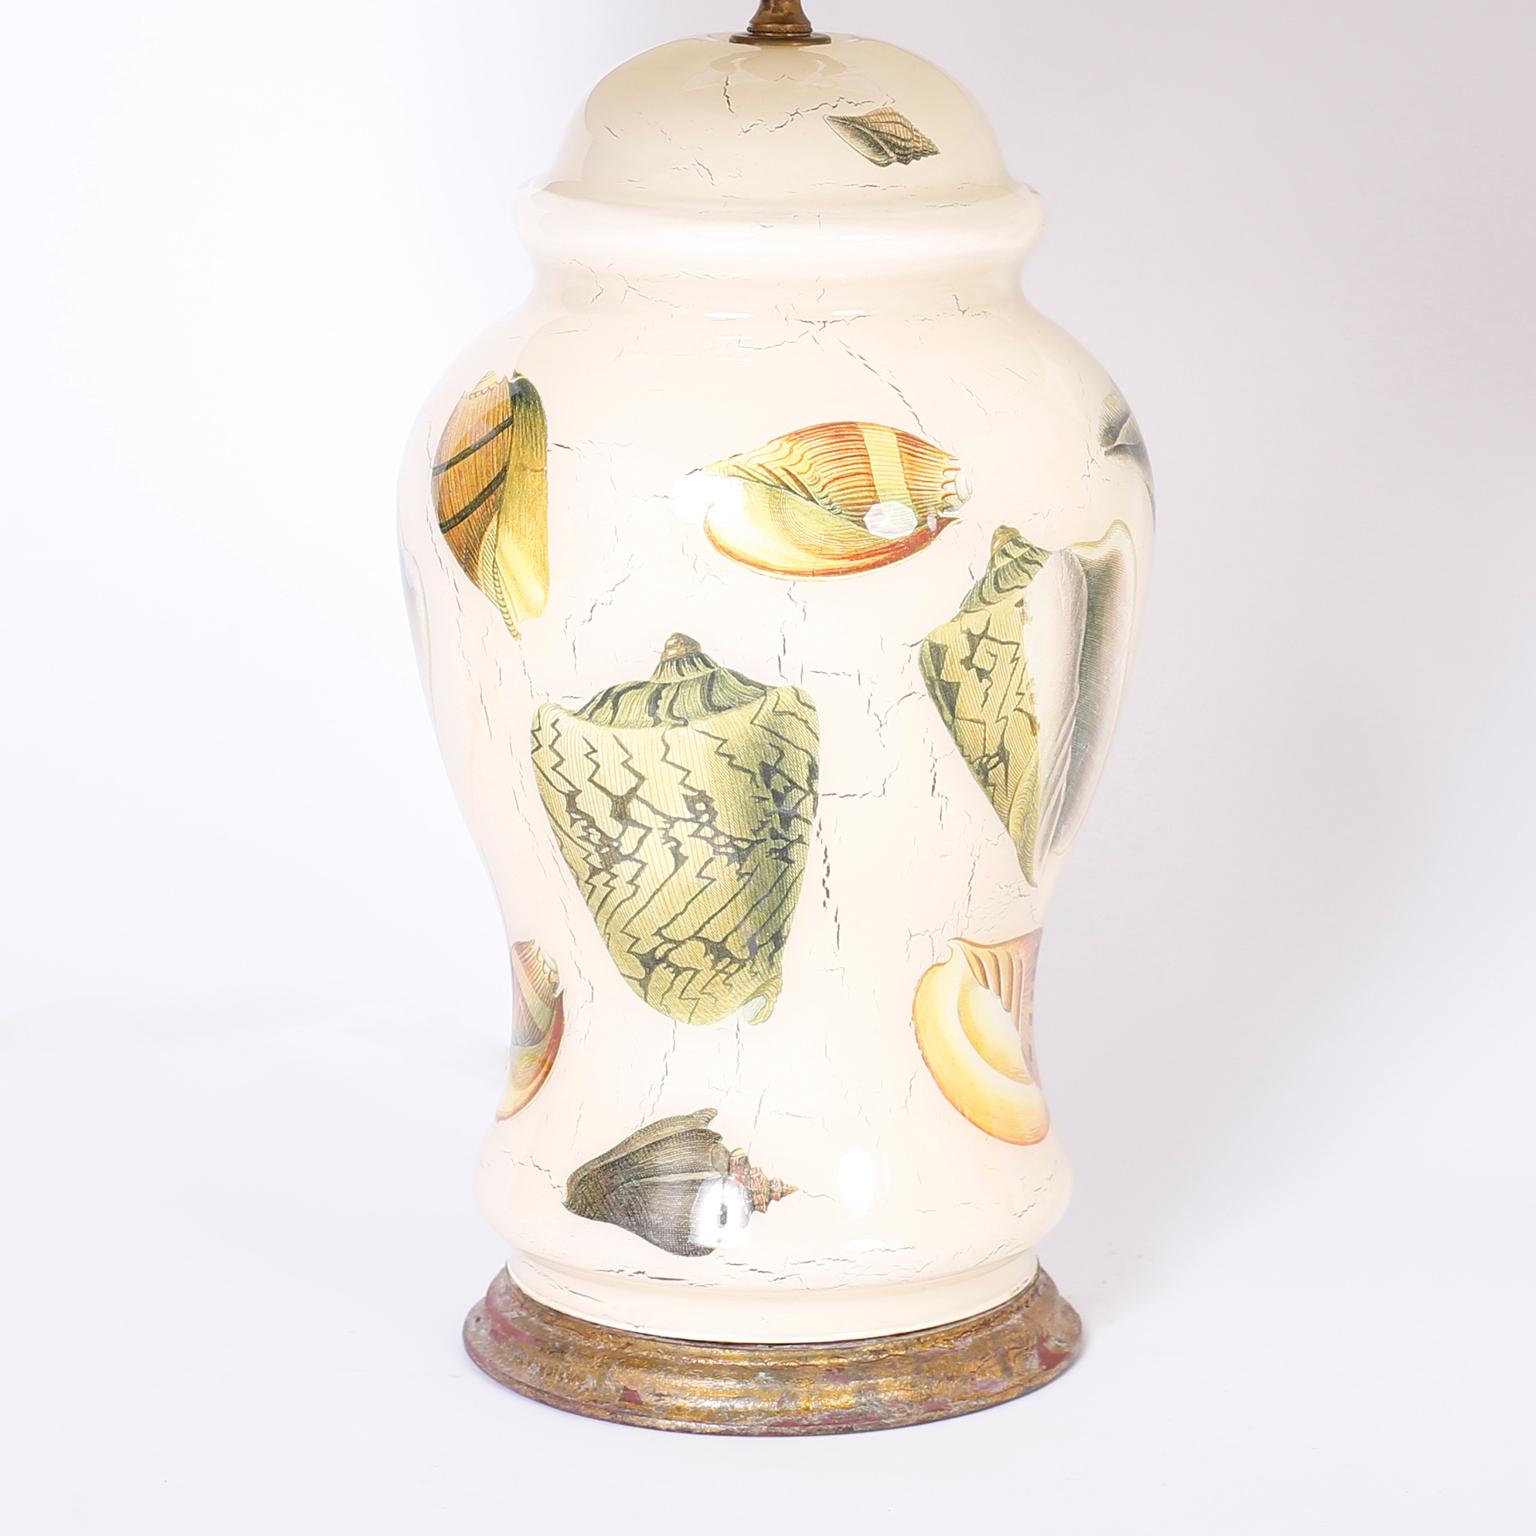 Midcentury pair of Italian table lamps with a Classic form and decorated with sea shells in a reverse decoupage technique against a cream colored background. Presented on distressed giltwood bases.